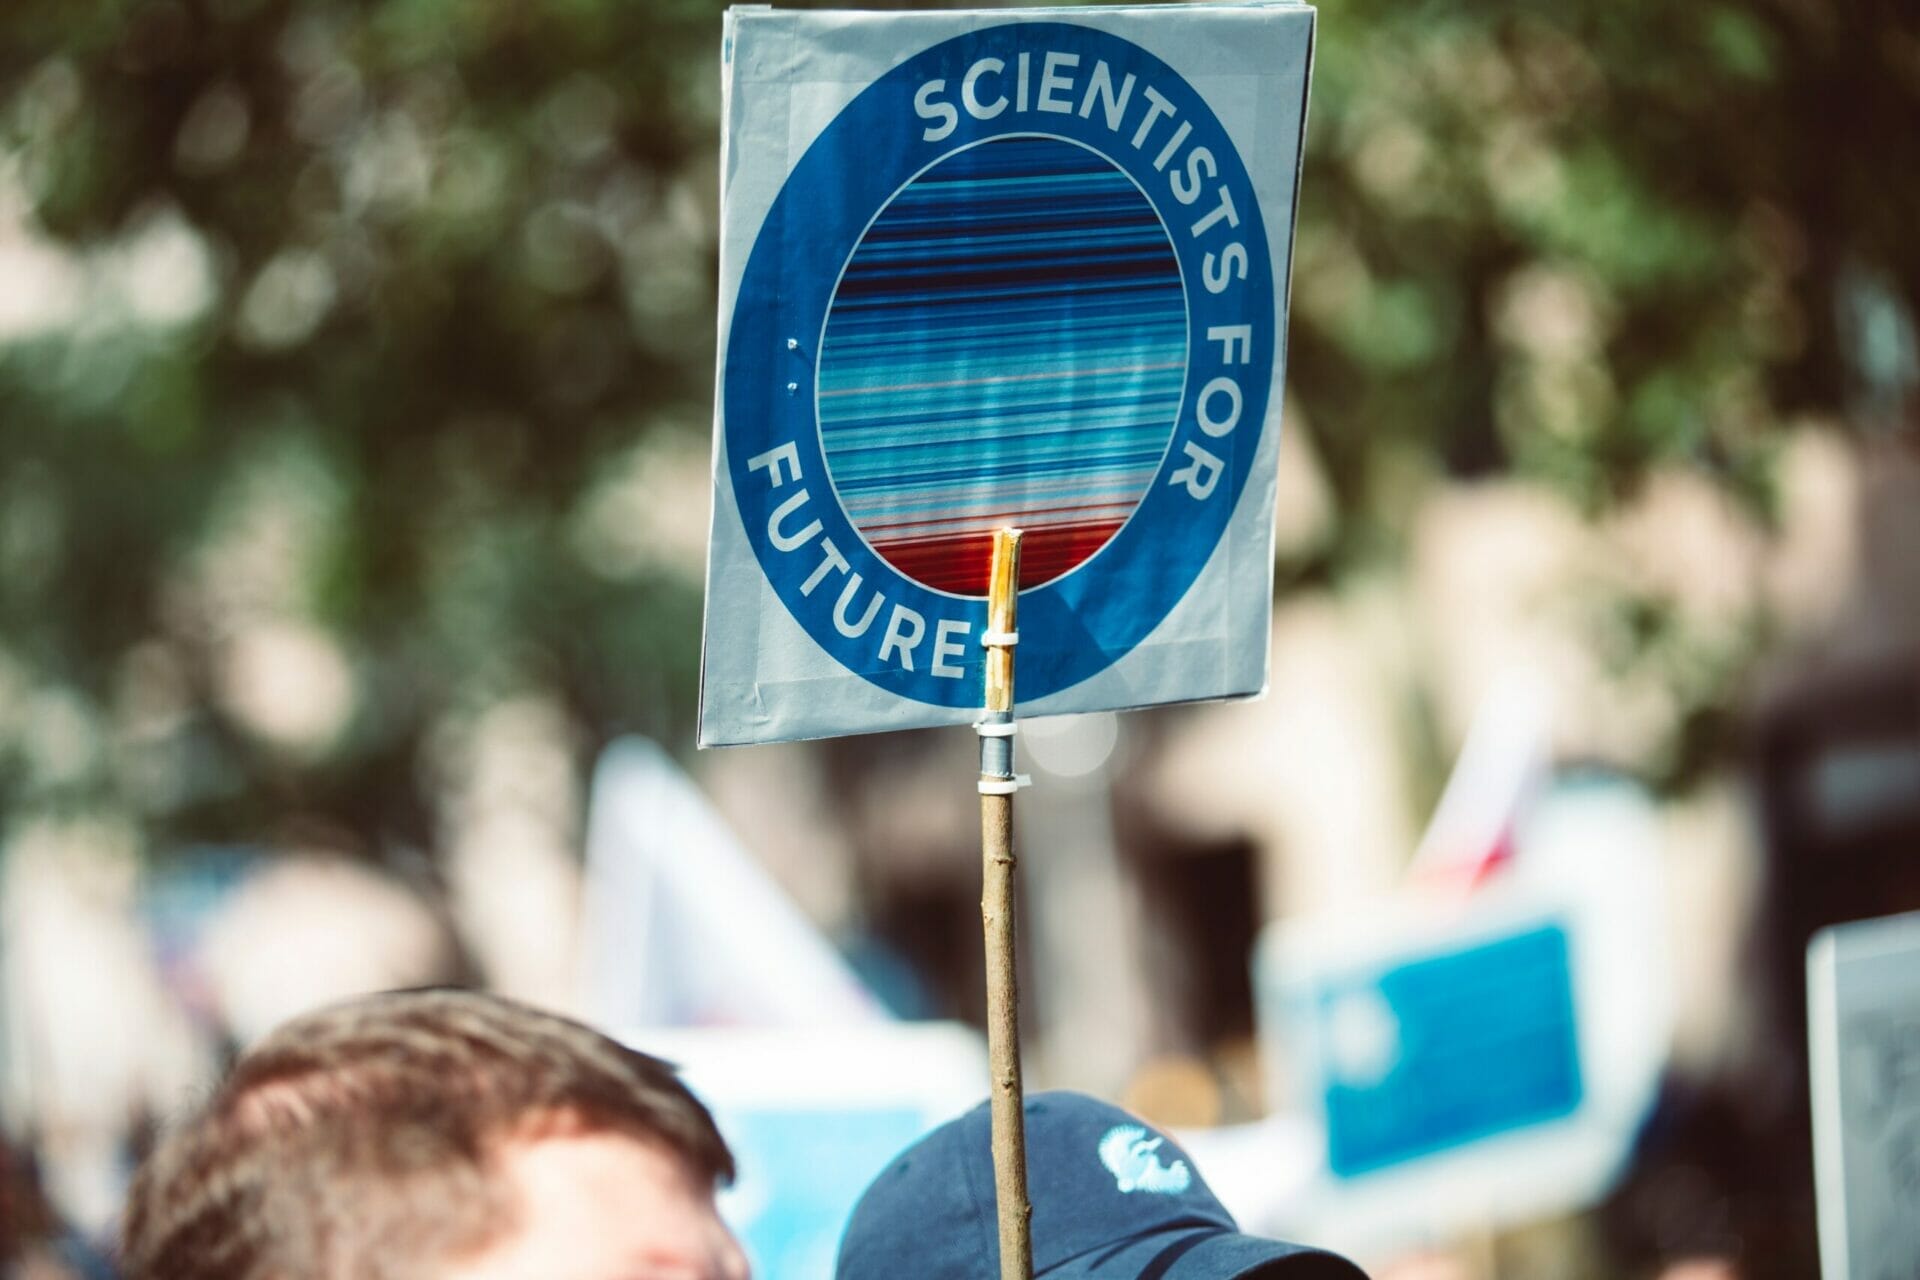 Protest sign with "Scientists for Future" logo